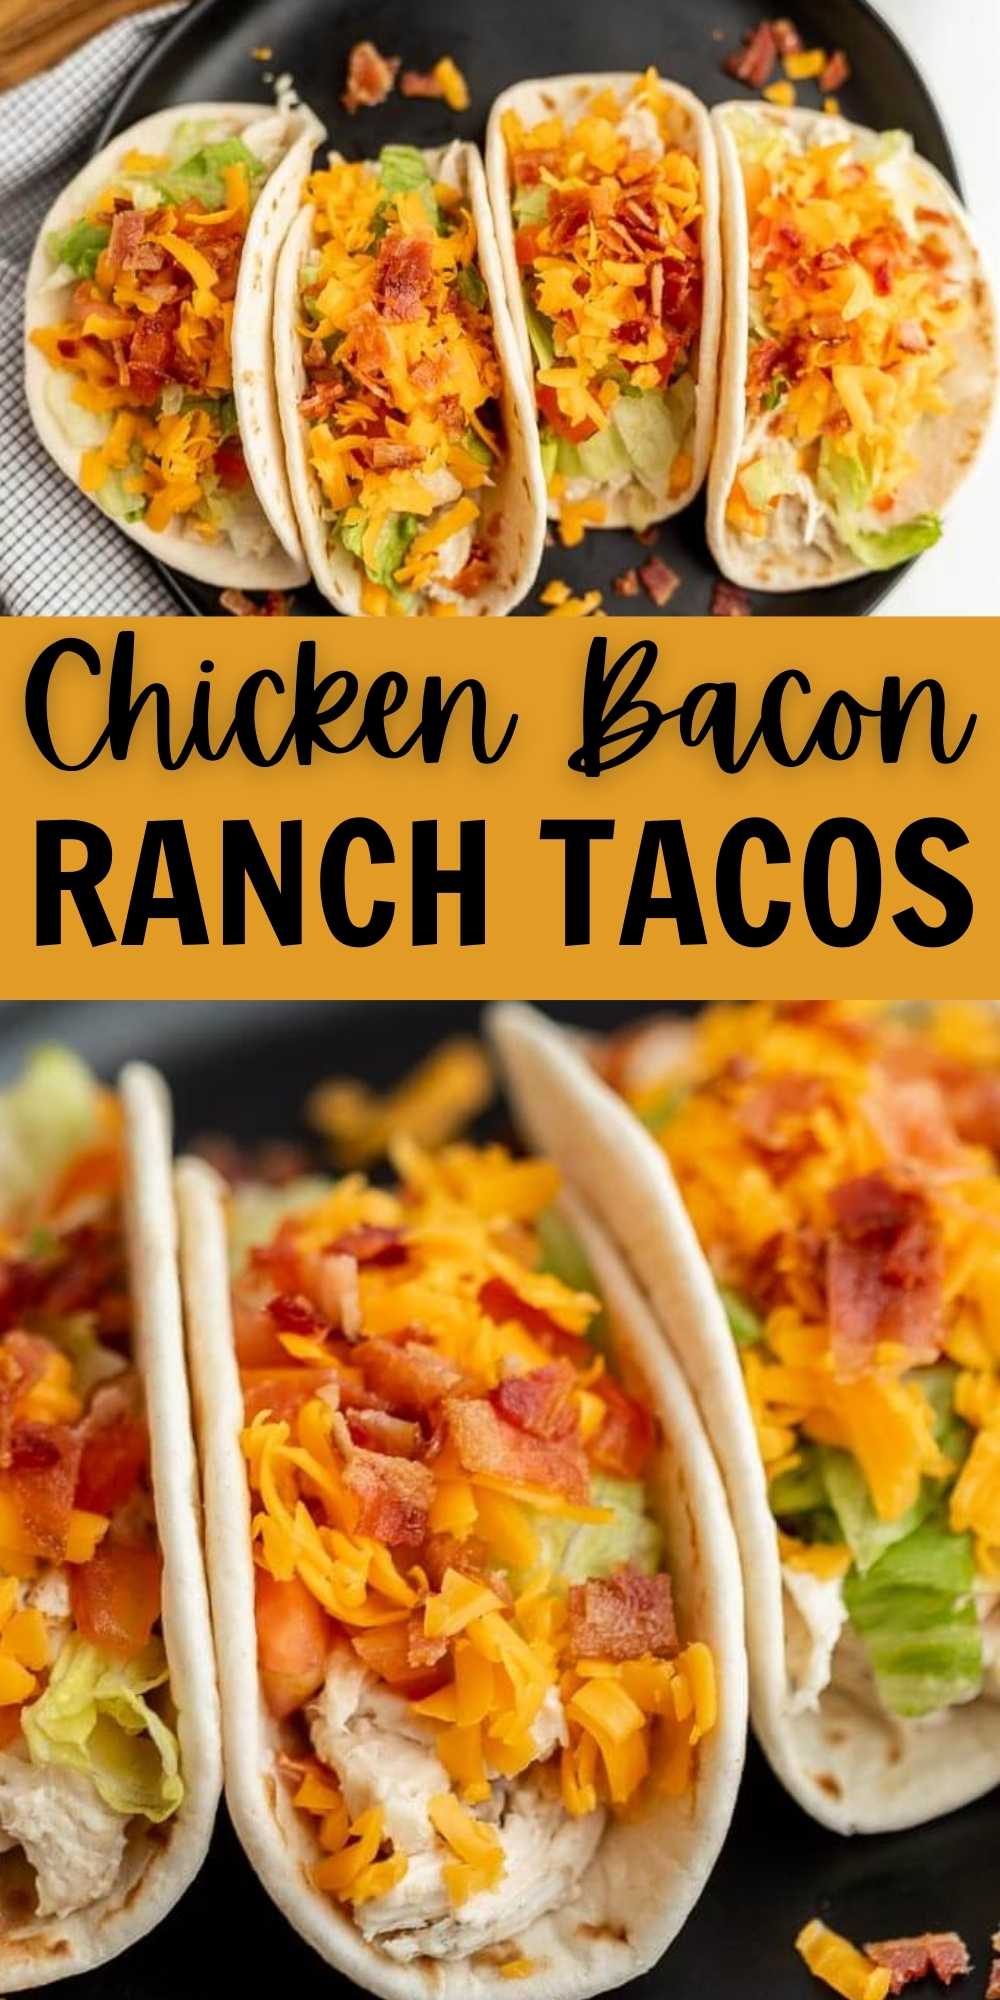 These chicken bacon ranch tacos are so easy to make with pre-cooked chicken!  Use a rotisserie chicken or leftover chicken to make these delicious tacos in just minutes that the entire family will love. #eatingonadime #tacorecipes #chickenrecipes #ranchrecipes 
